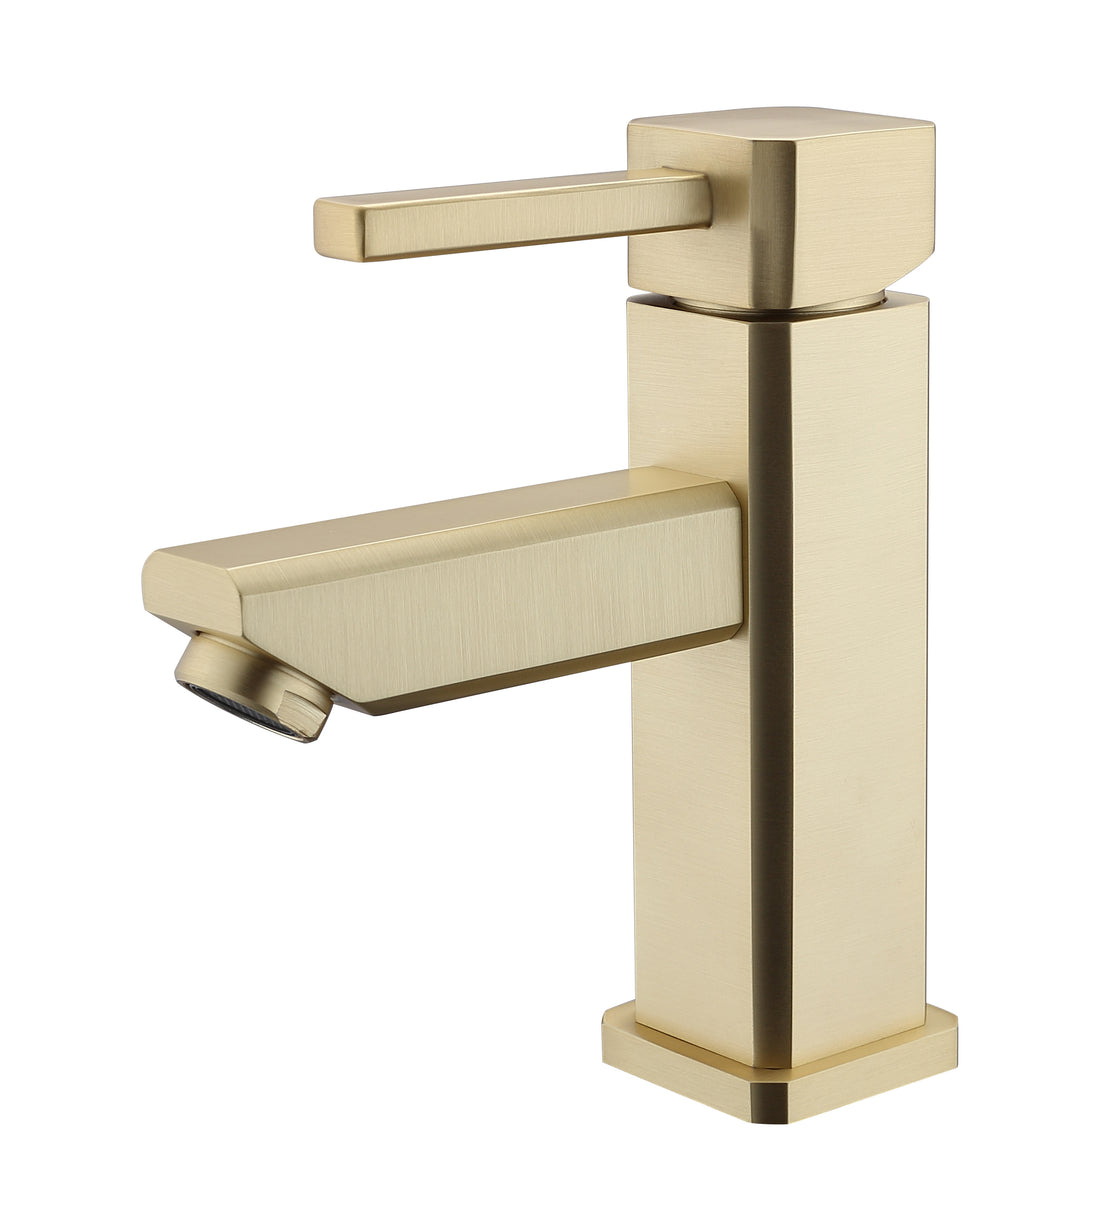 High-Quality Upc Faucet With Drain In Gold (Zy6301-G) - 1 Year Manufacture Defects-Parts Only